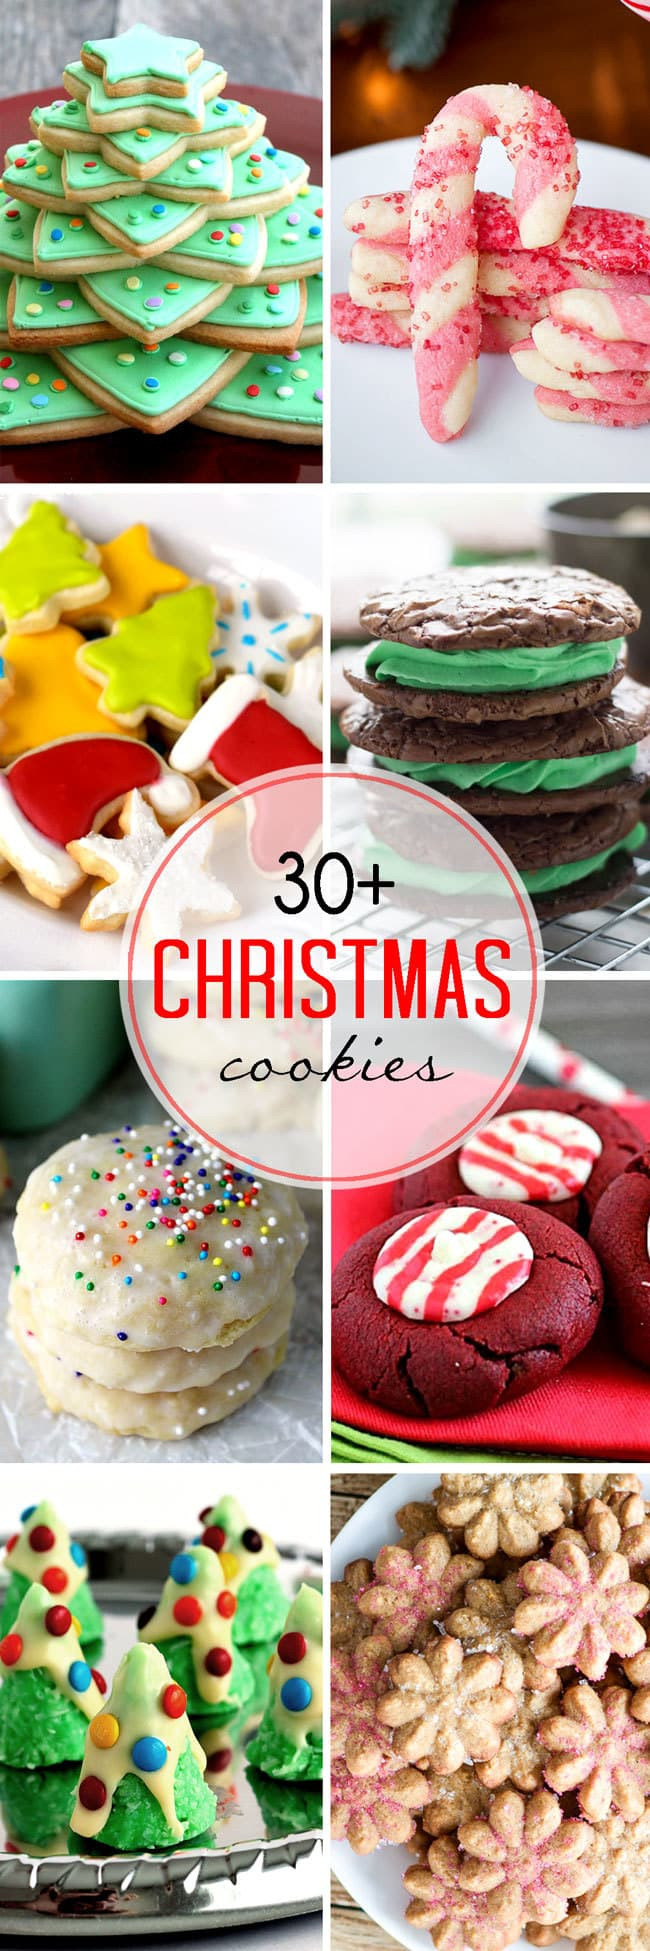 Christmas Cookies Favorite
 Over 30 of the Best Christmas Cookies from Your Favorite